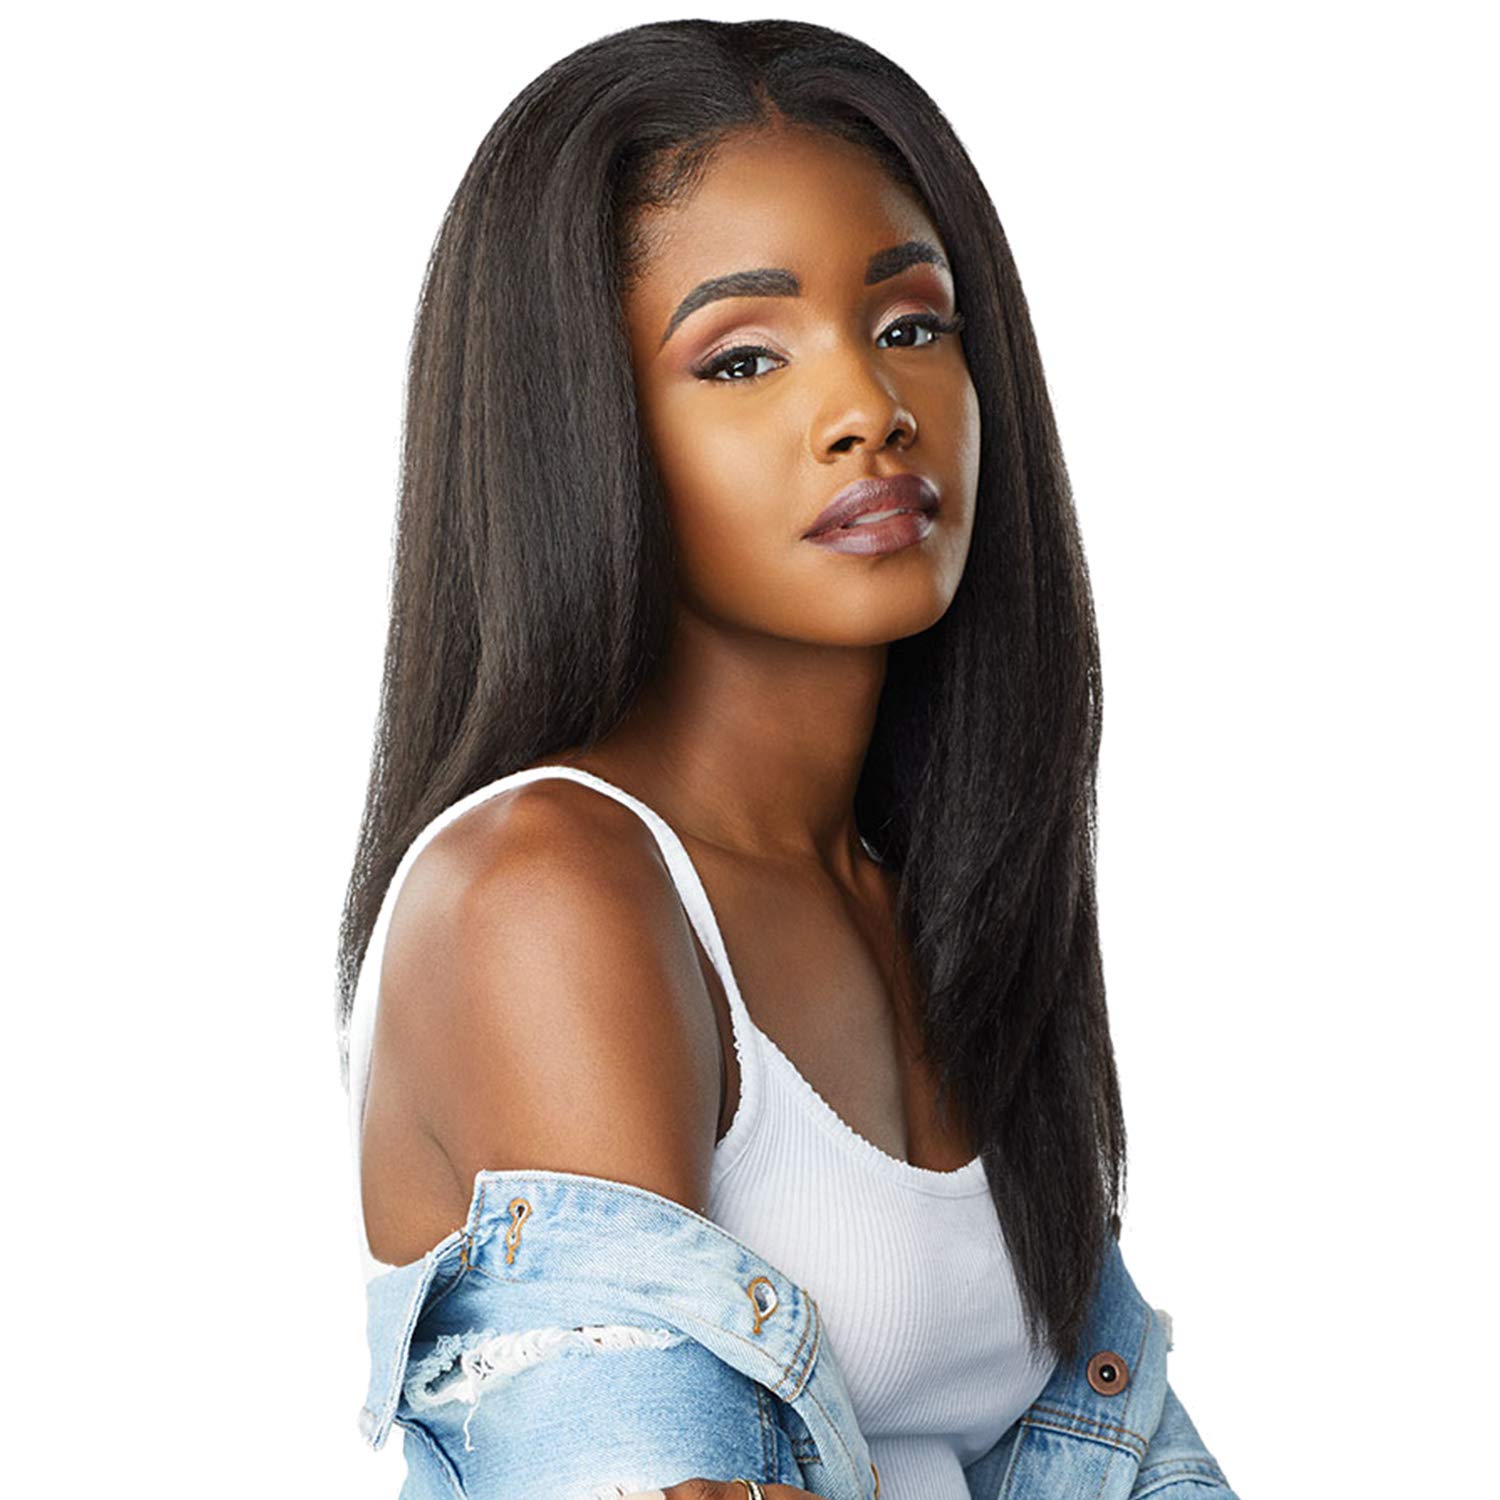 Sensationnel CKCo HalfWig - Synthetic Instant weave full wig style CURLS KINKS AND CO Half wig - ALPHA WOMAN (1) Find Your New Look Today!